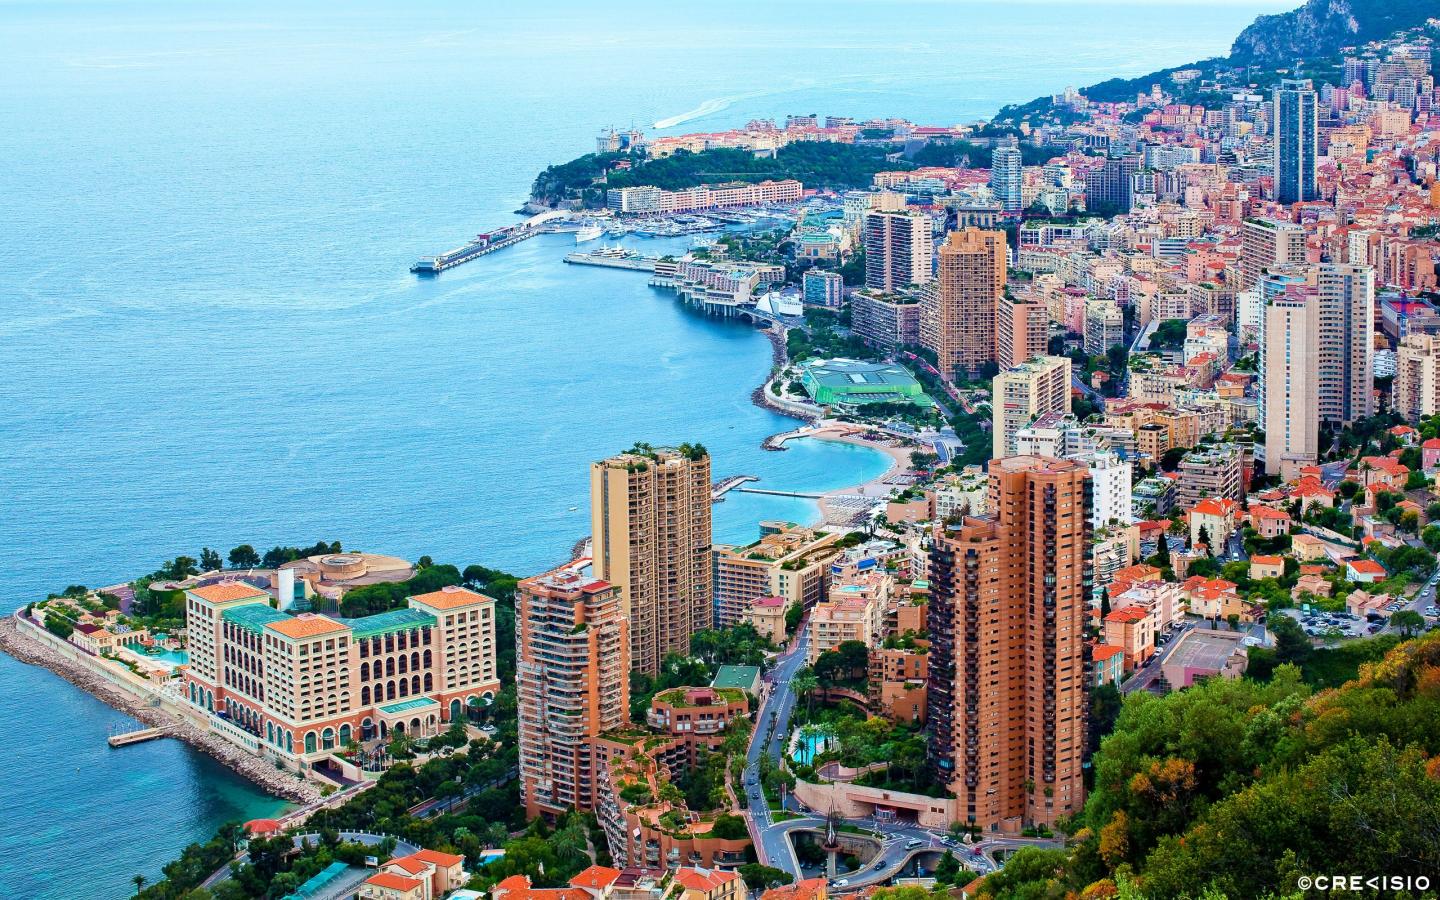 Cloudy Day in Monaco by Crevisio